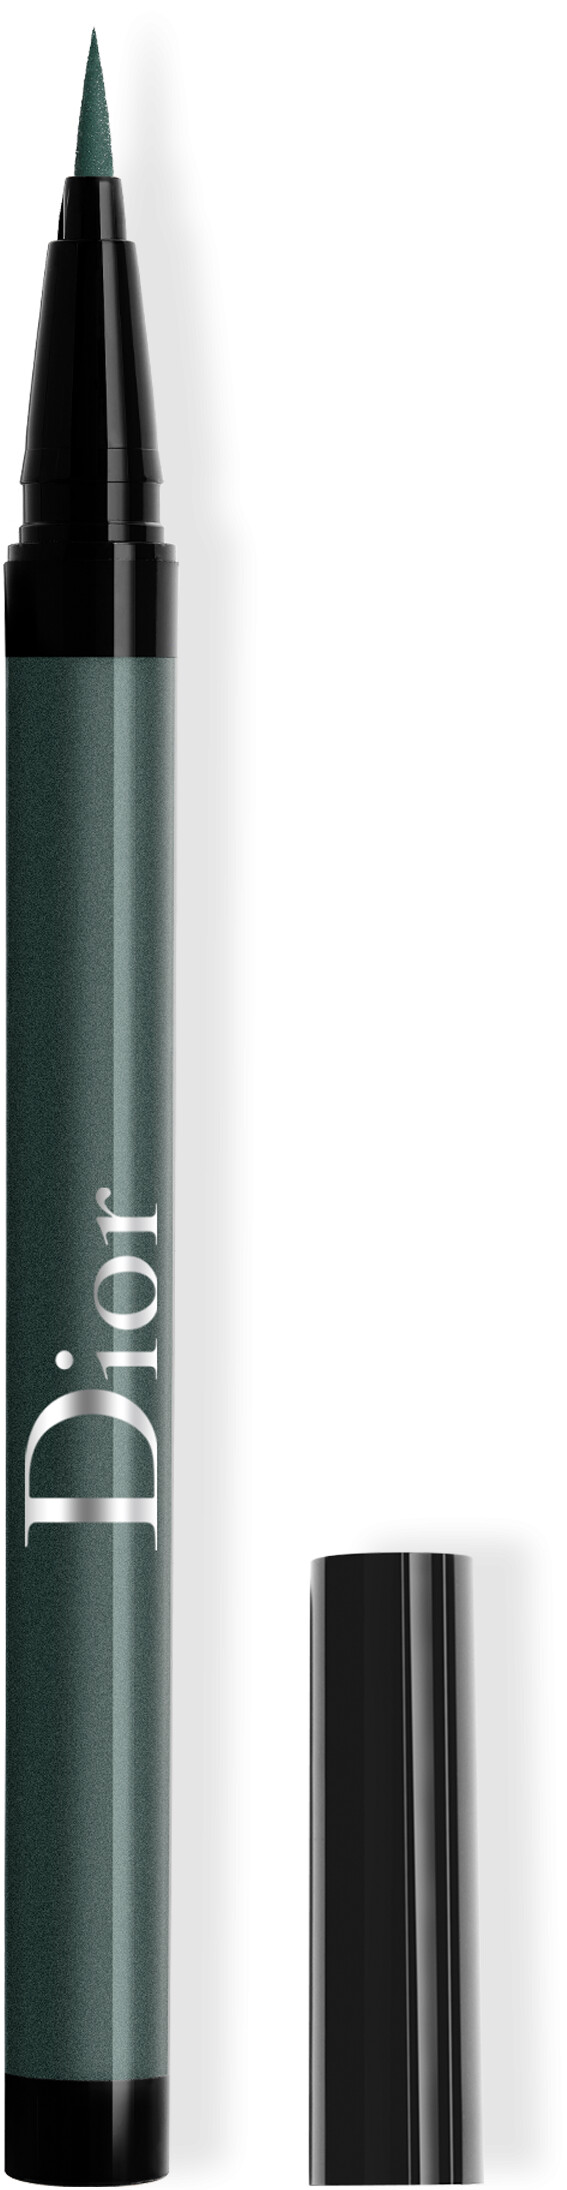 DIOR Diorshow On Stage Liner 0.55ml 386 - Pearly Emerald